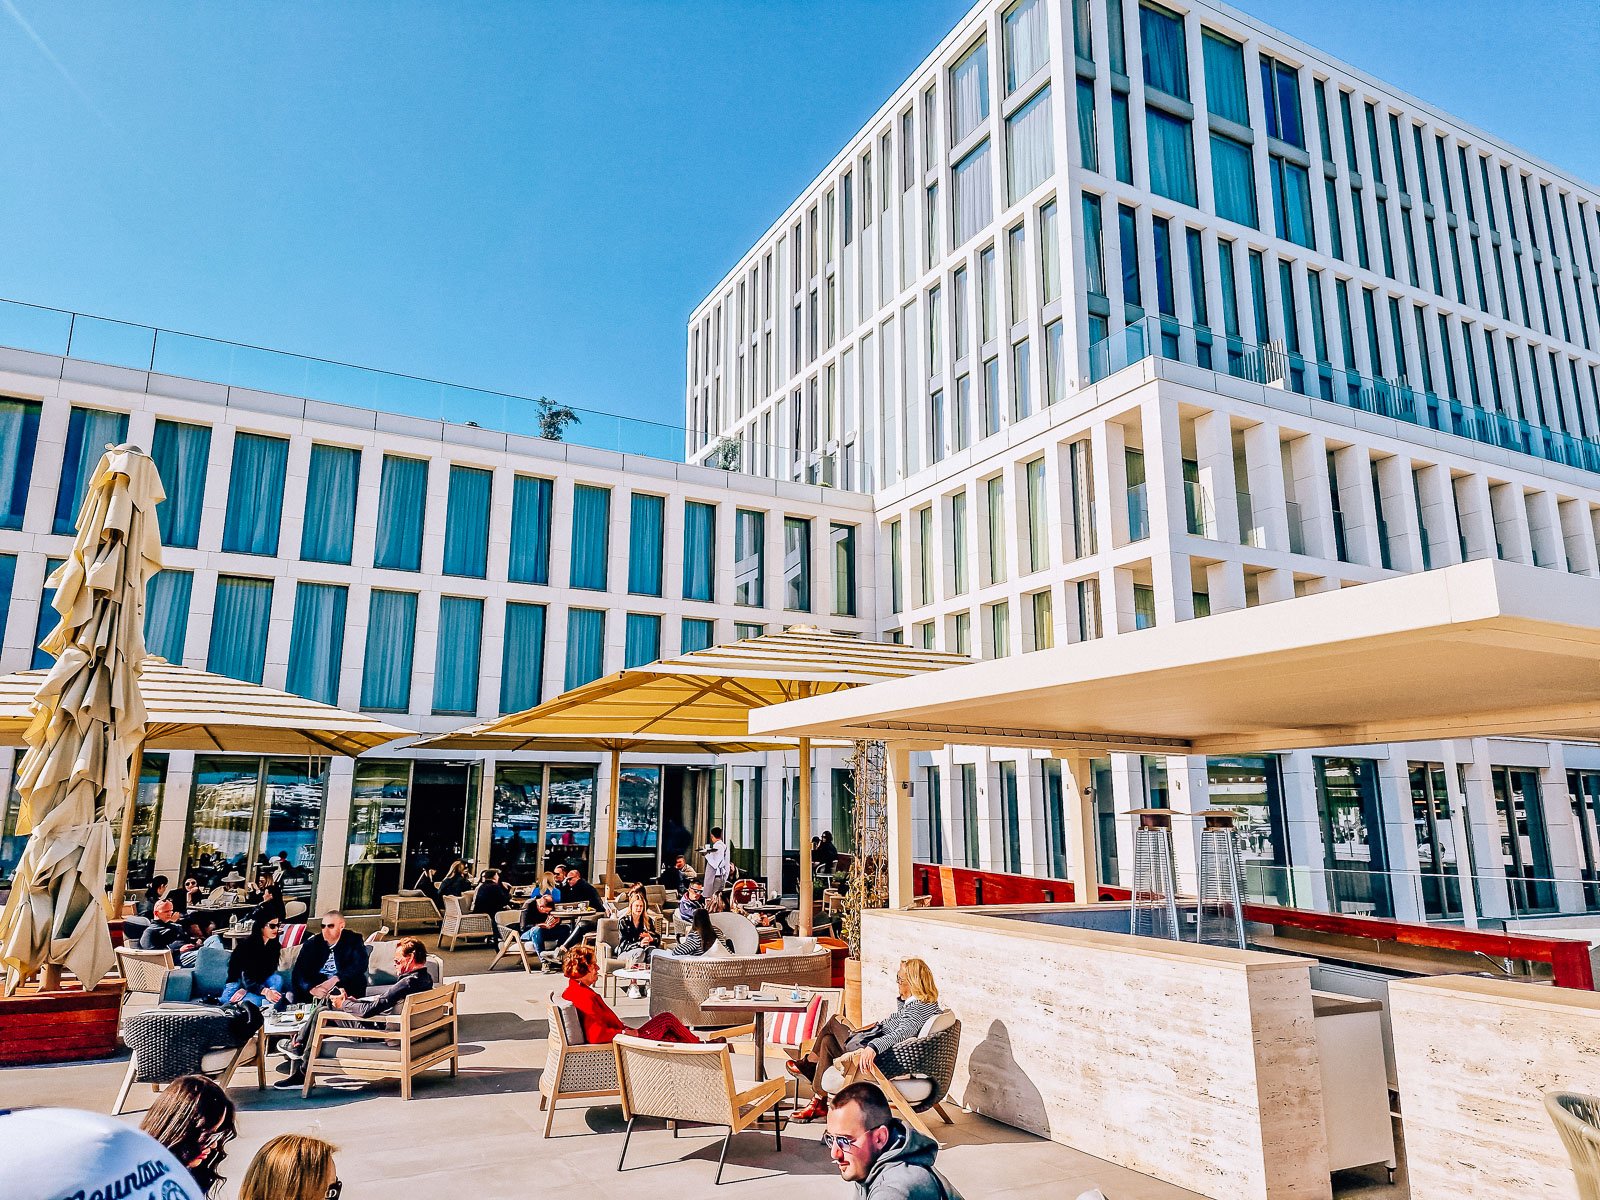 A sun terrace with people enjoying drinks in the sun in front of a modern white building